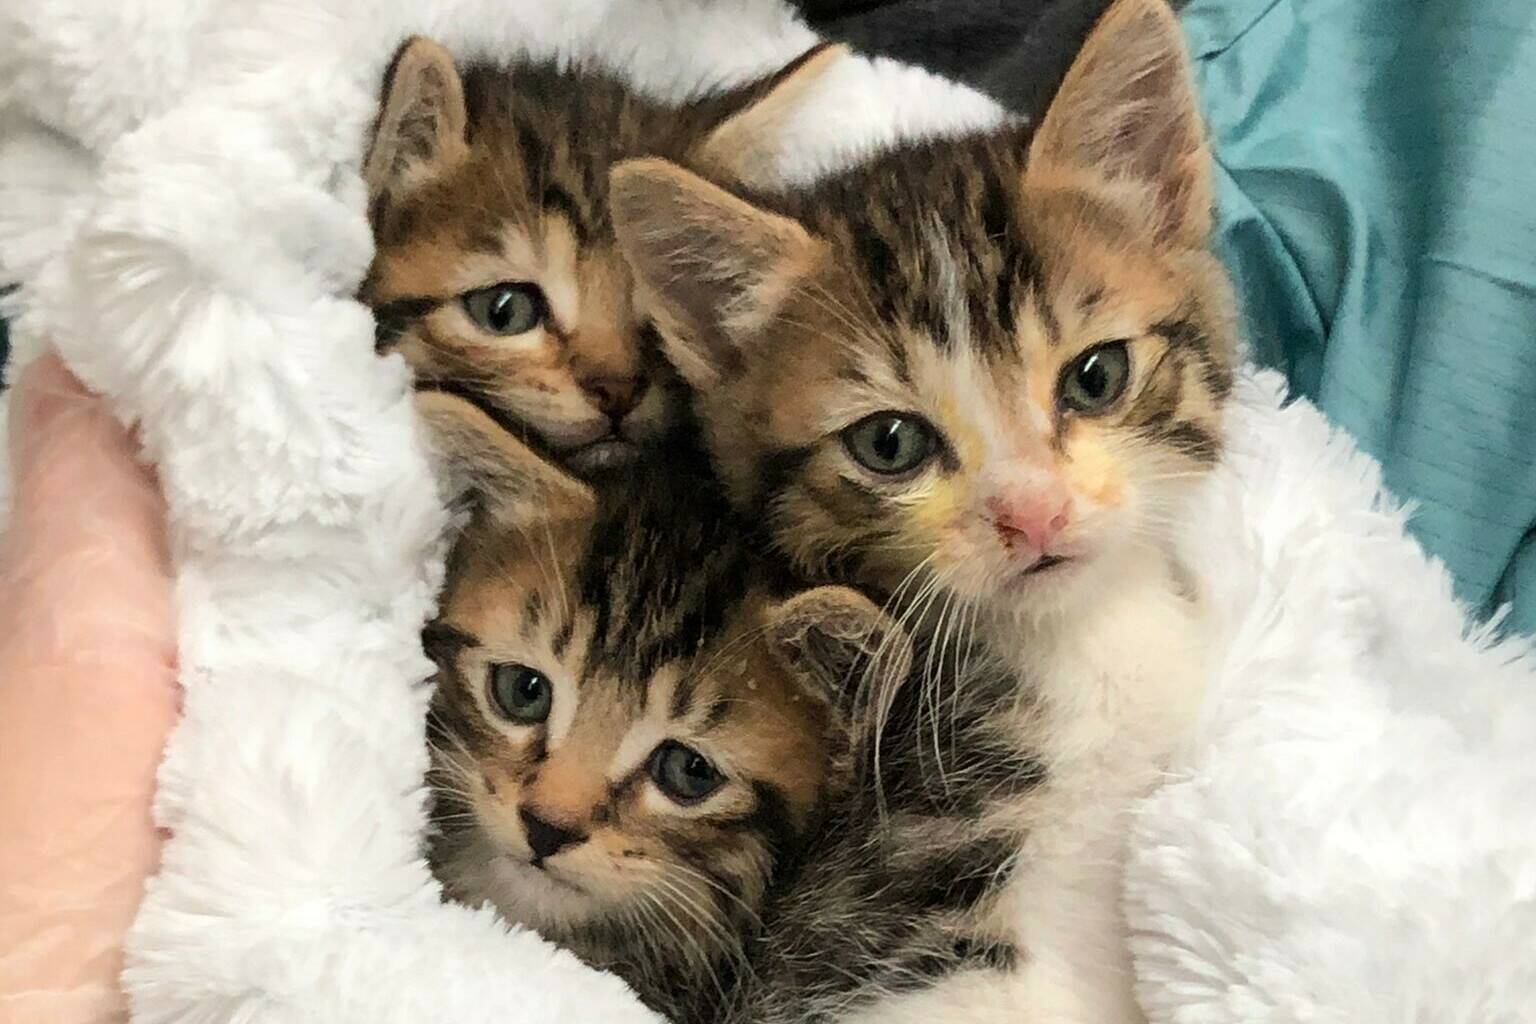 Three kittens found in a dumpster in Vancouver’s Downtown Eastside in February 2022 were found by a Good Samaritan. (BC SPCA handout)